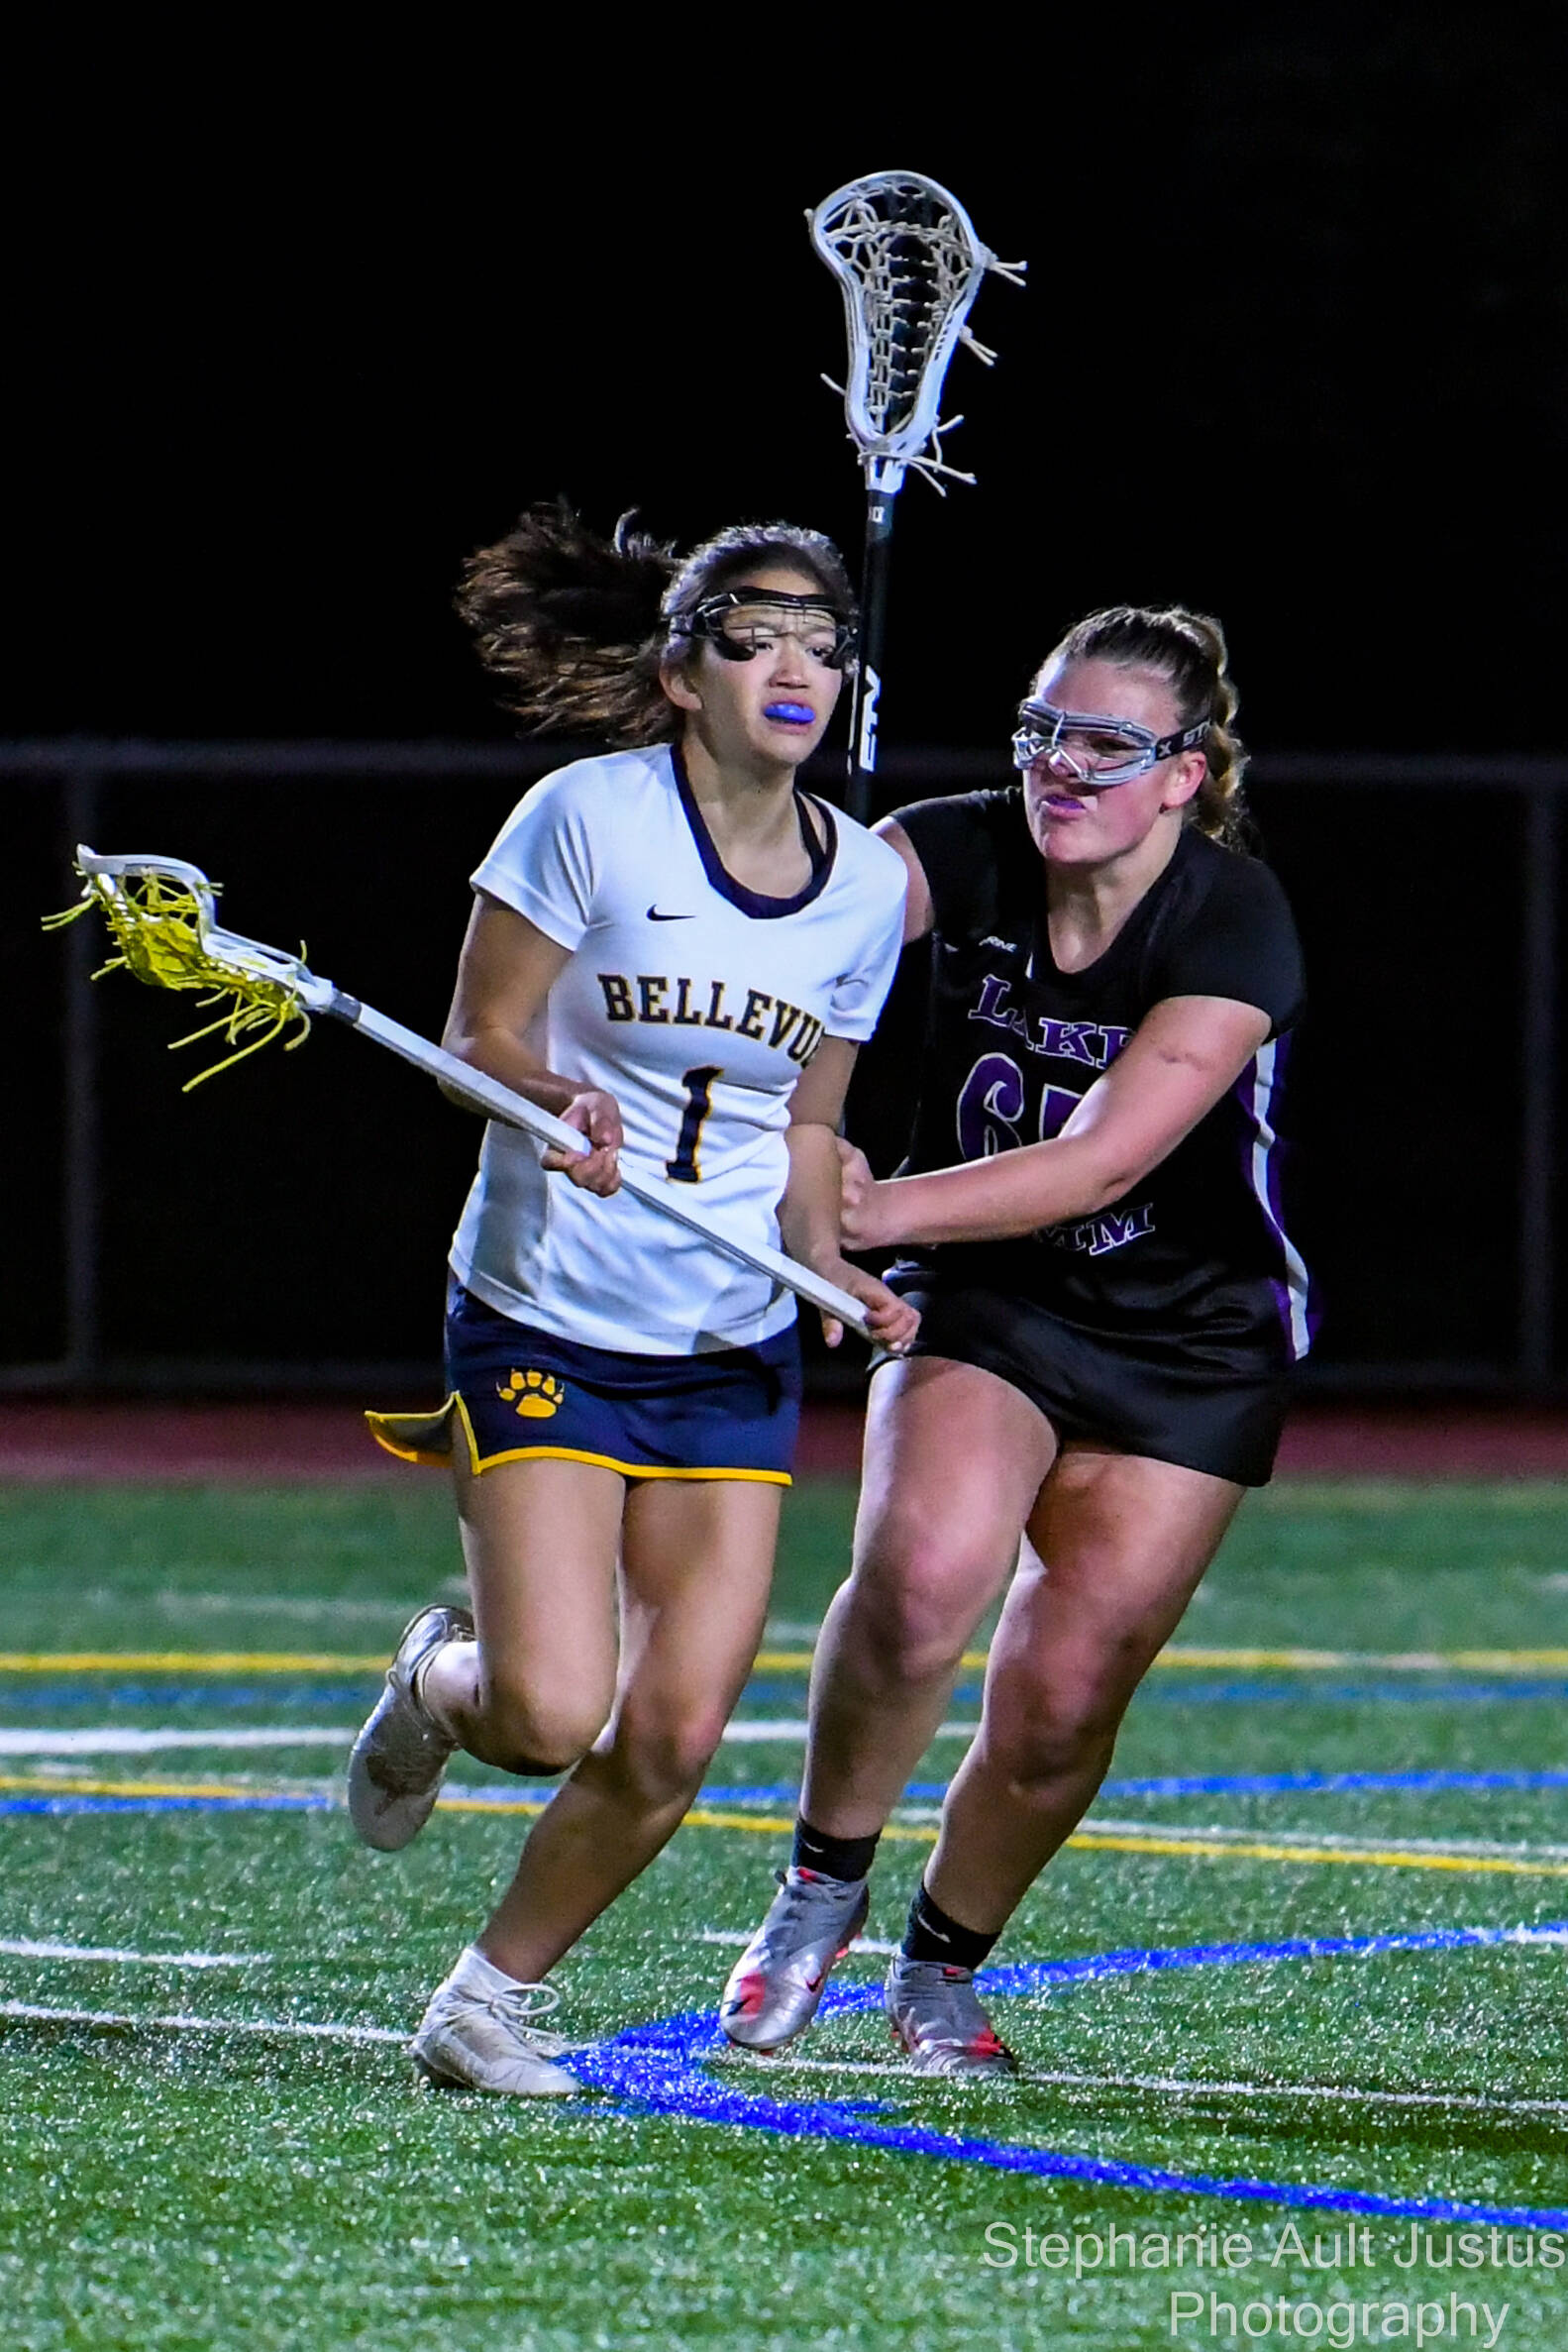 Bellevue player Lauren Park (#1) moves past Lake Sammamish player, Brooke Mead (#65). Courtesy of Stephanie Ault Justus.